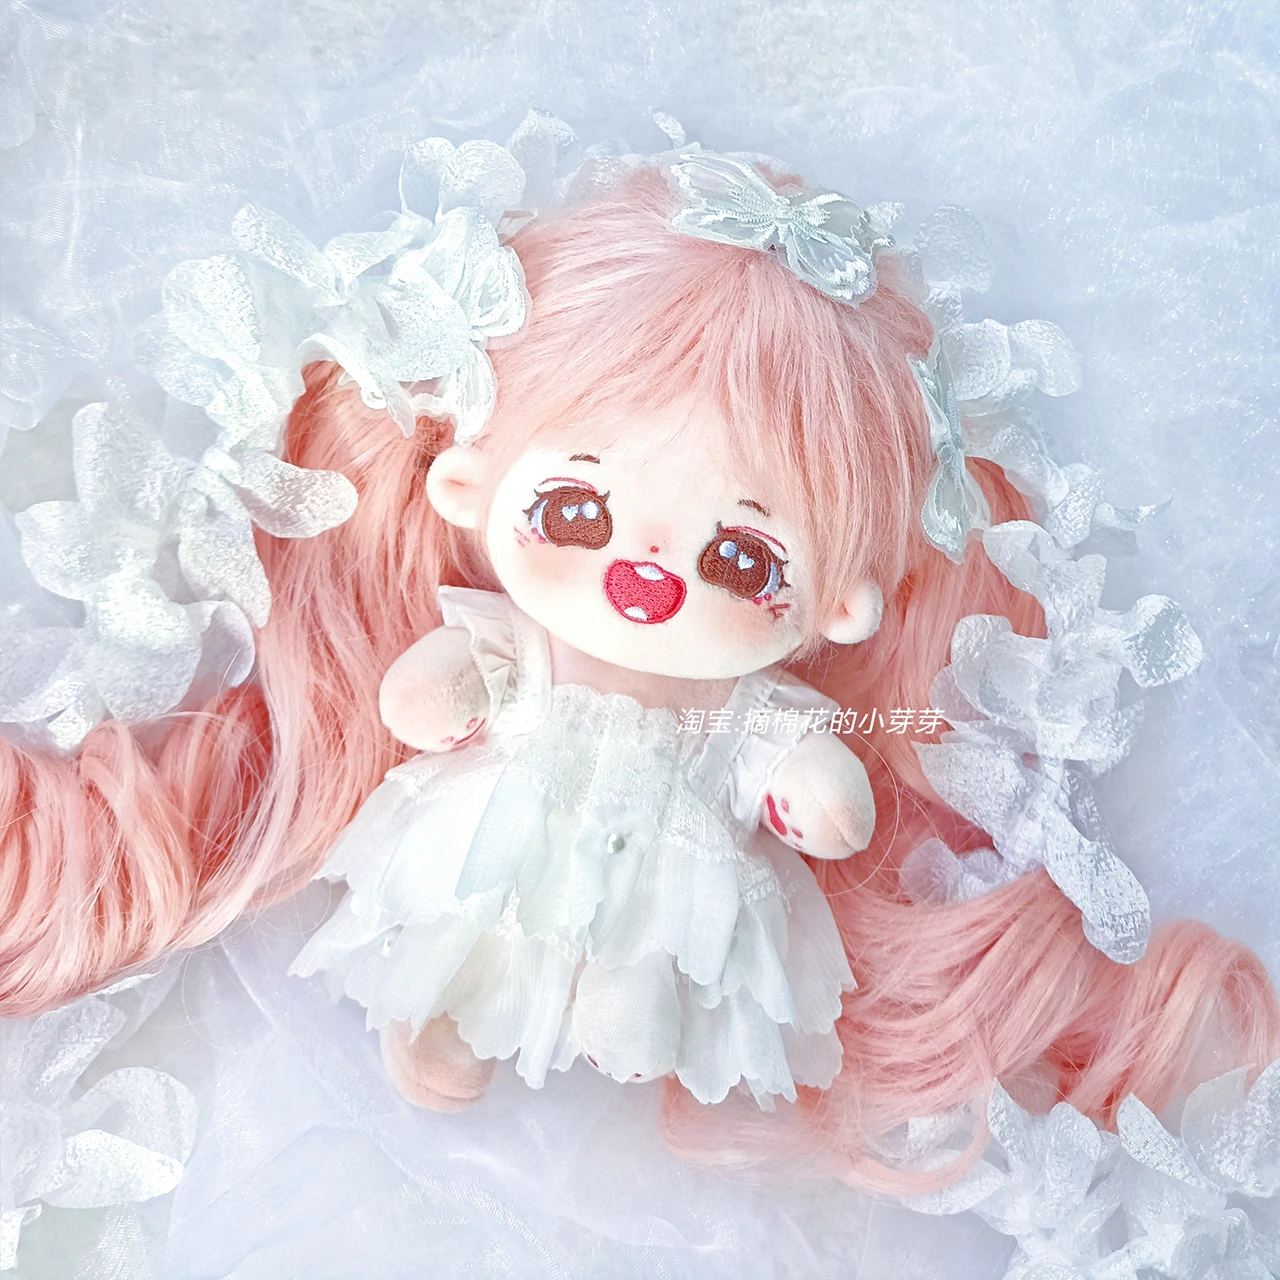 

white Lolita Girl Lace Bowknot Barrette Princess 20cm No Attribute Doll Dress Cosplay Sweet Plush Doll Change Clothes Outfit